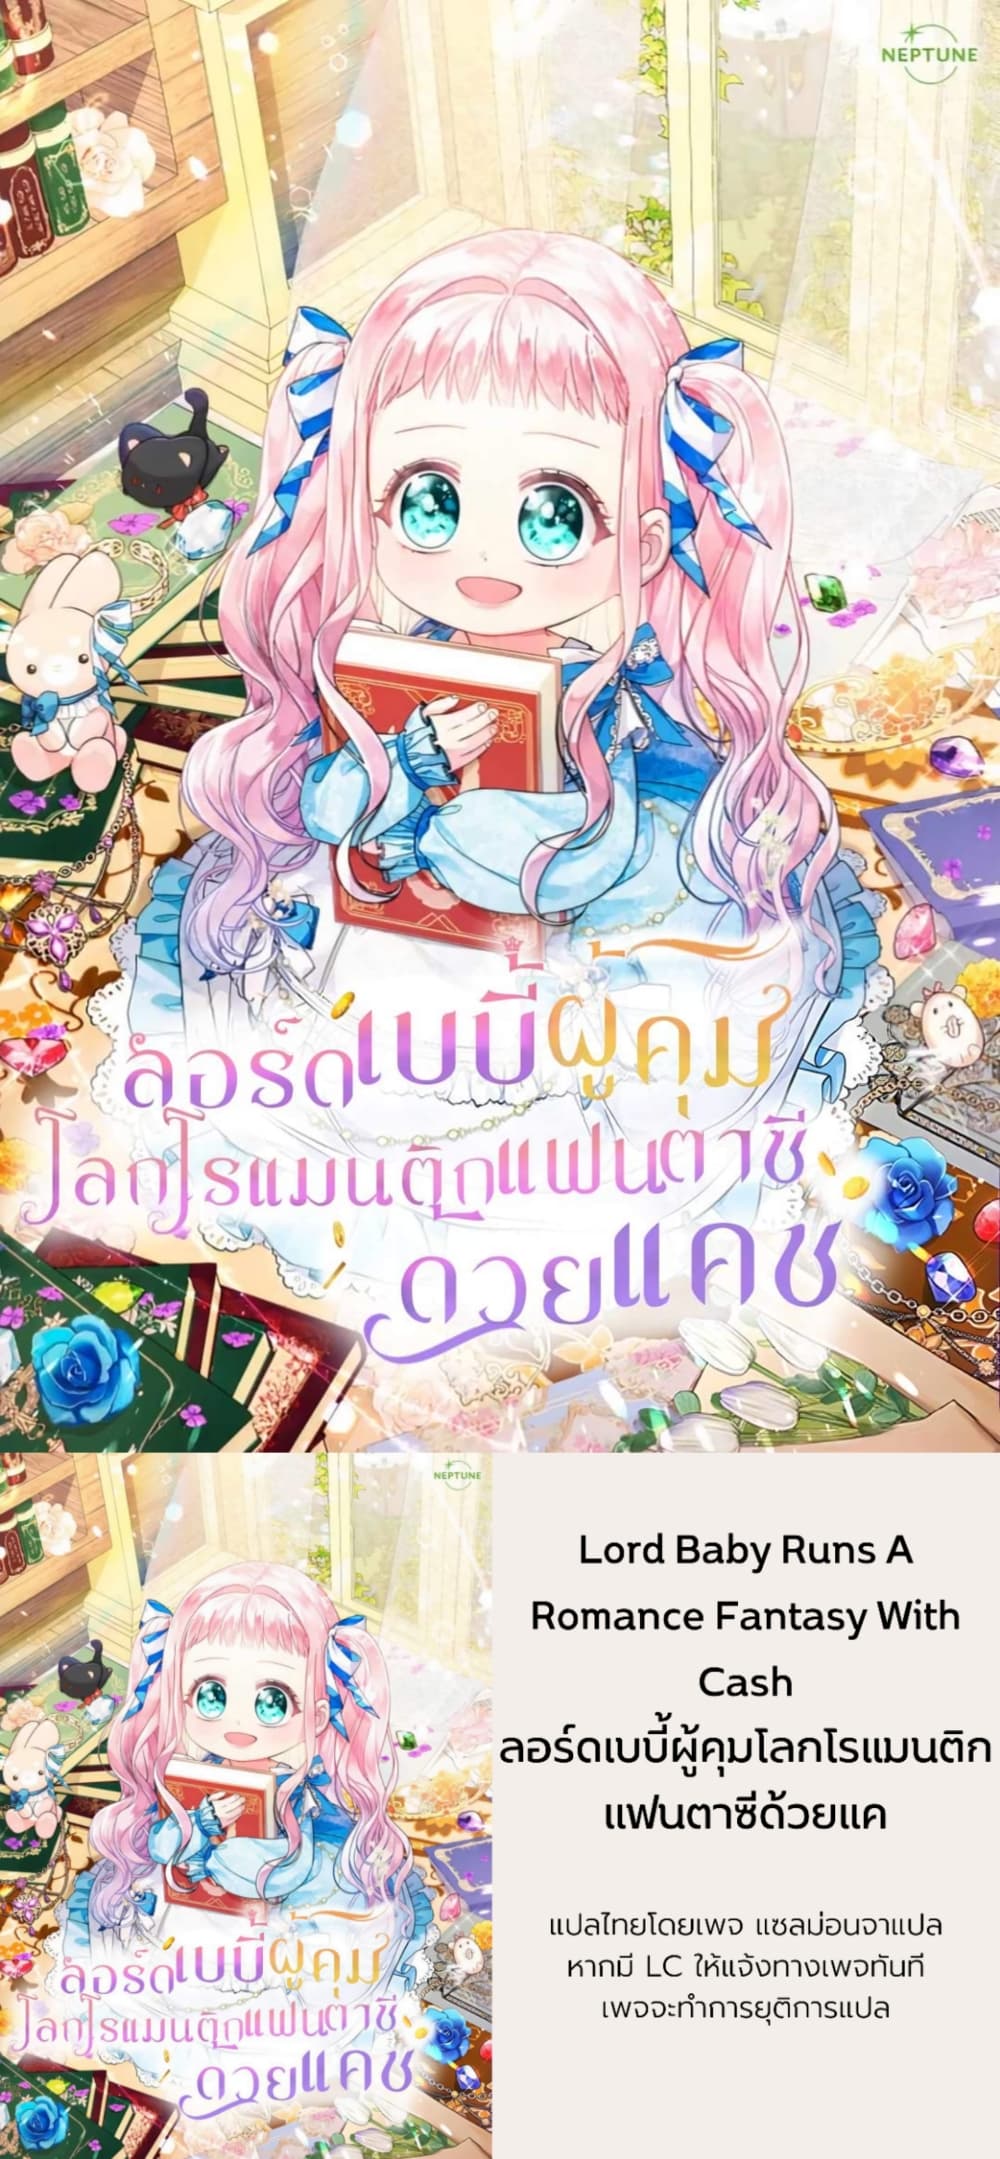 Lord Baby Runs a Romance Fantasy With Cash 11-11